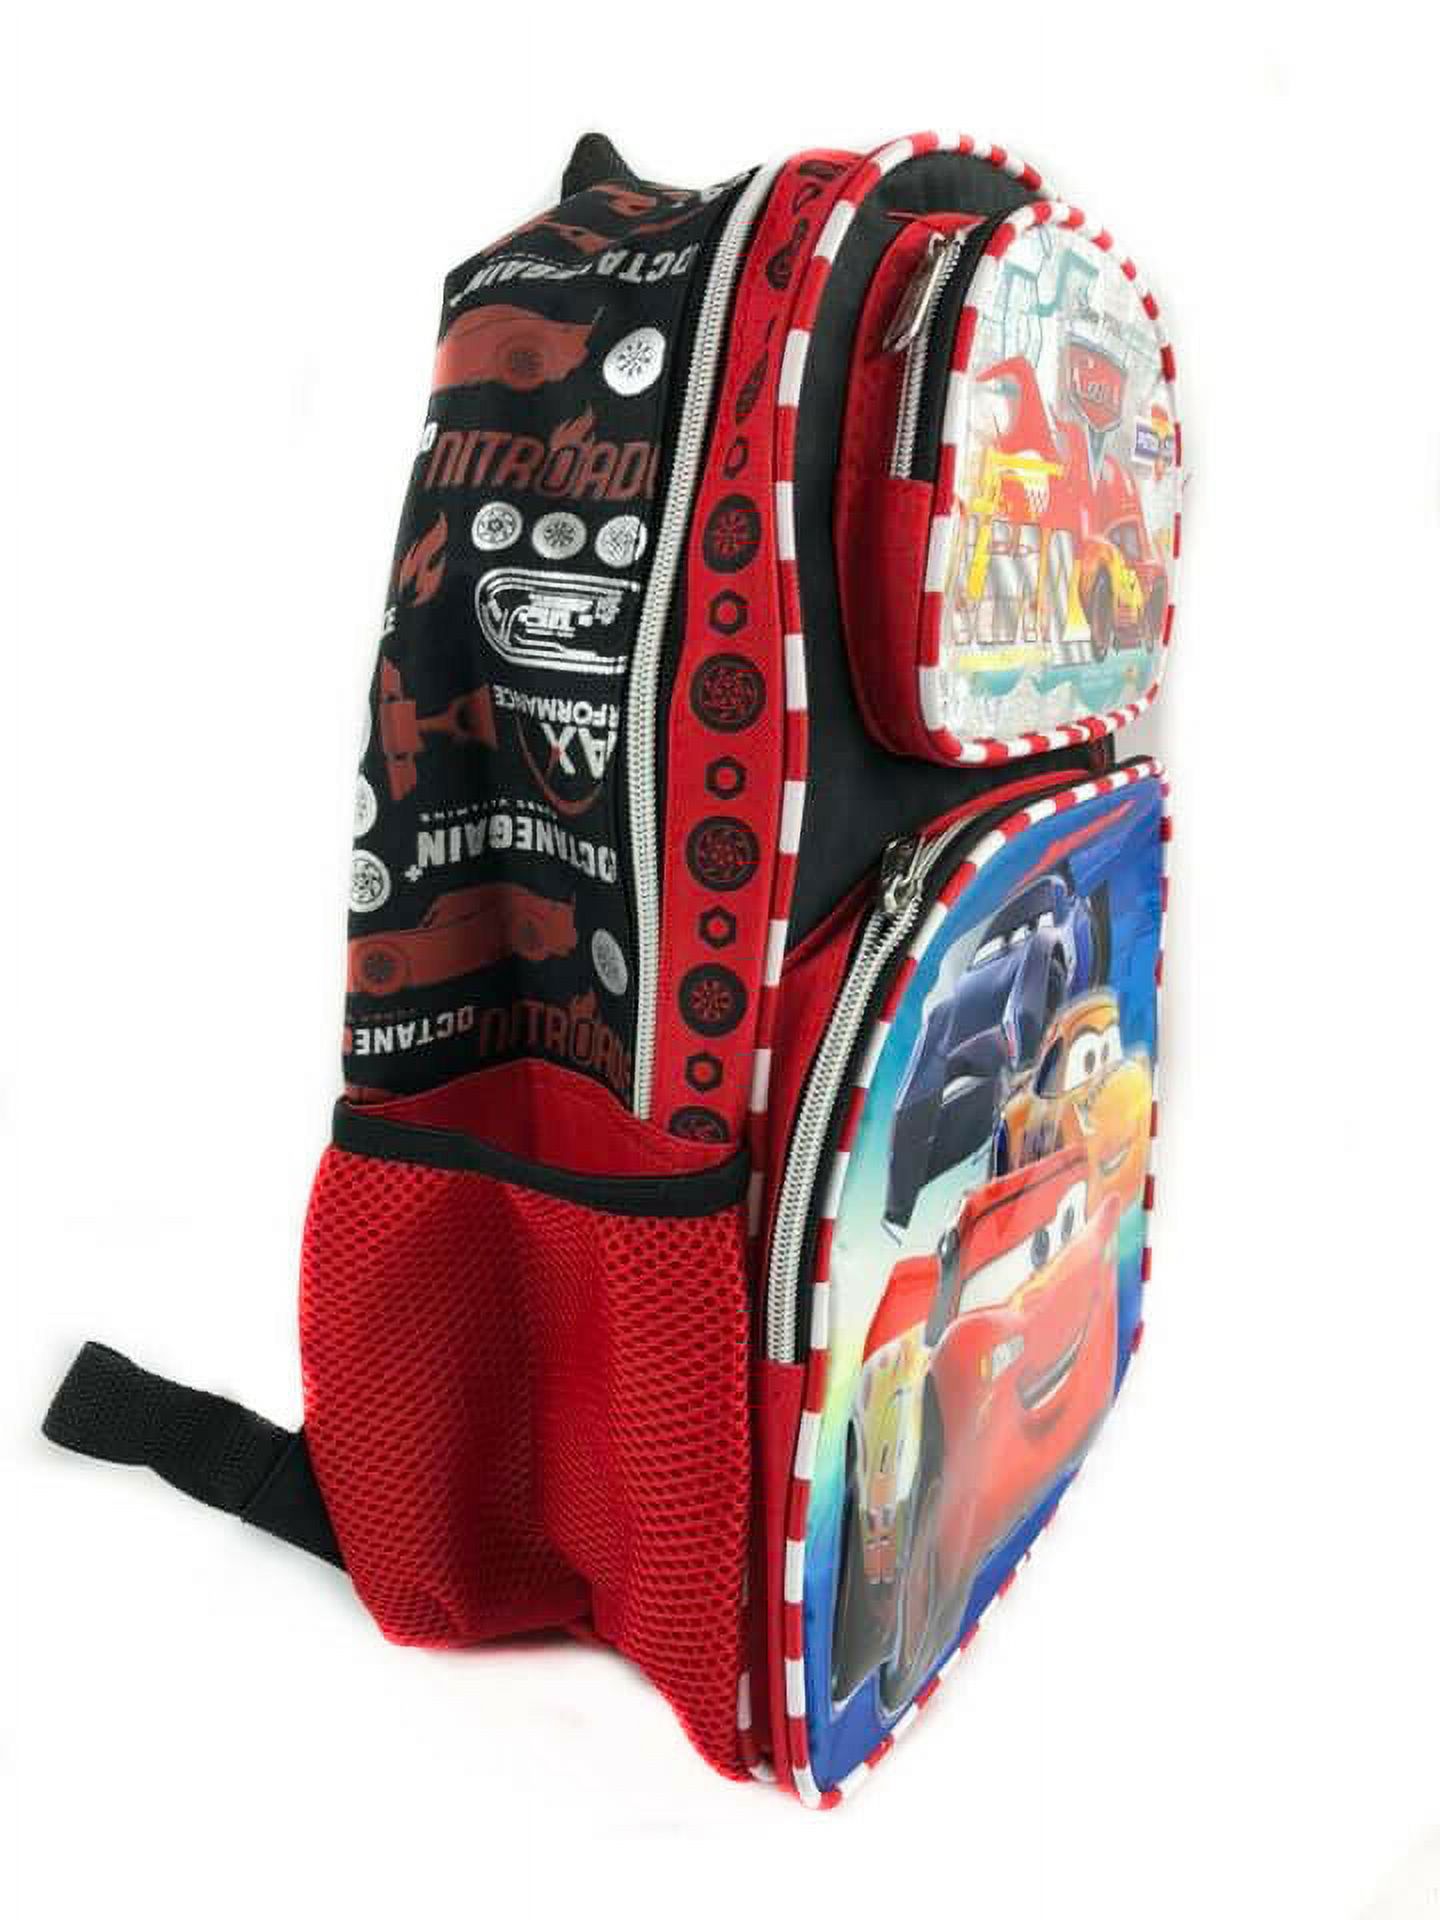 Disney Cars 3 Movie Lightning Mc Queen 16" Inches Backpack School Kids Book Bag - image 3 of 4